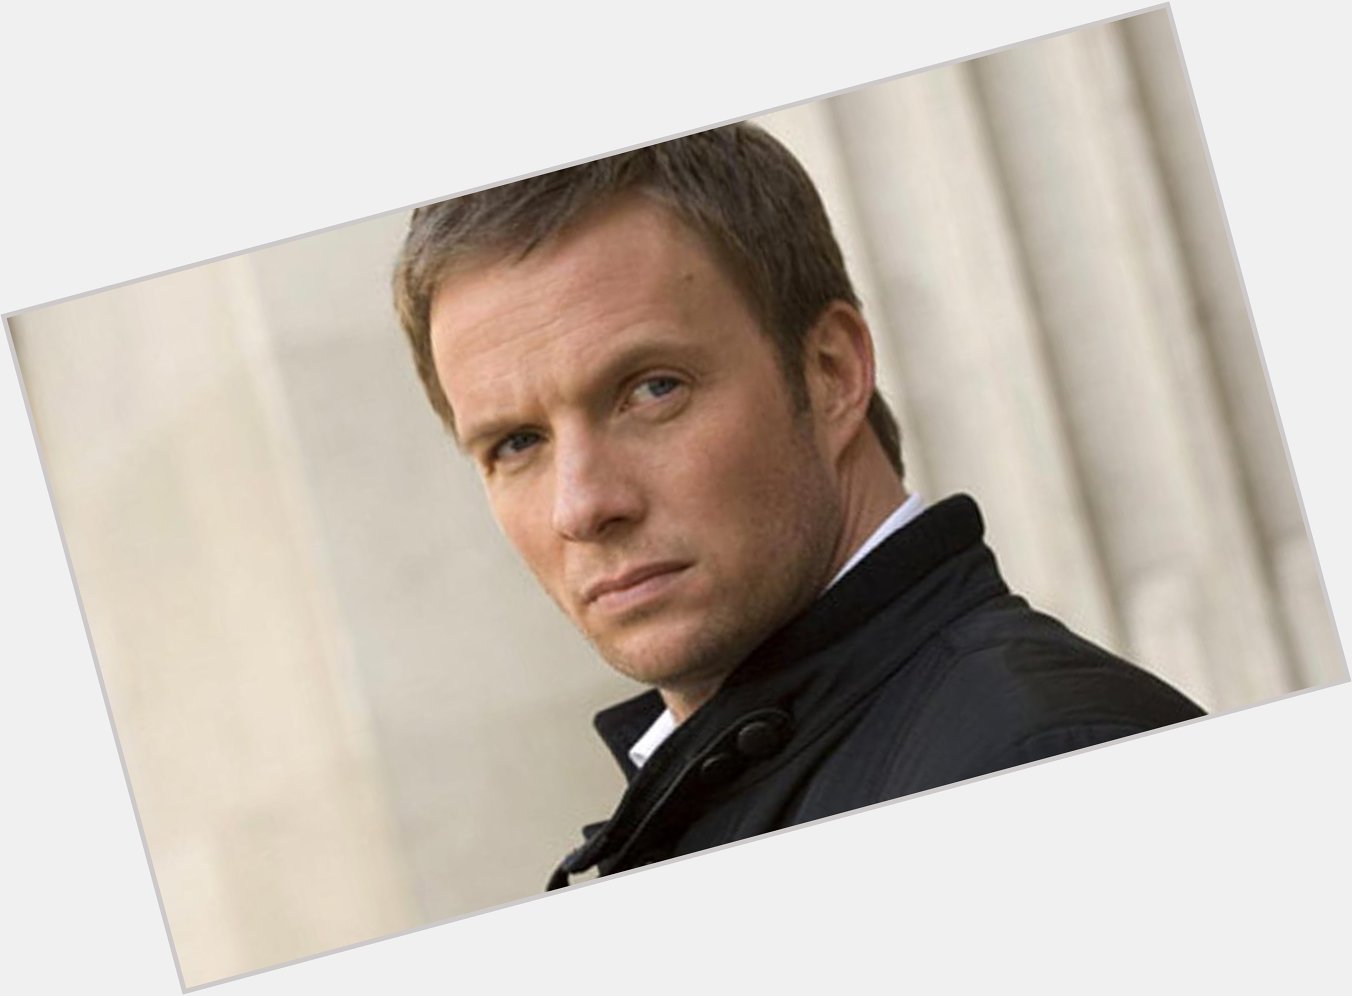 Happy birthday to Rupert Penry-Jones!! He turns 45 today. Check out 5 binge-worthy roles:  